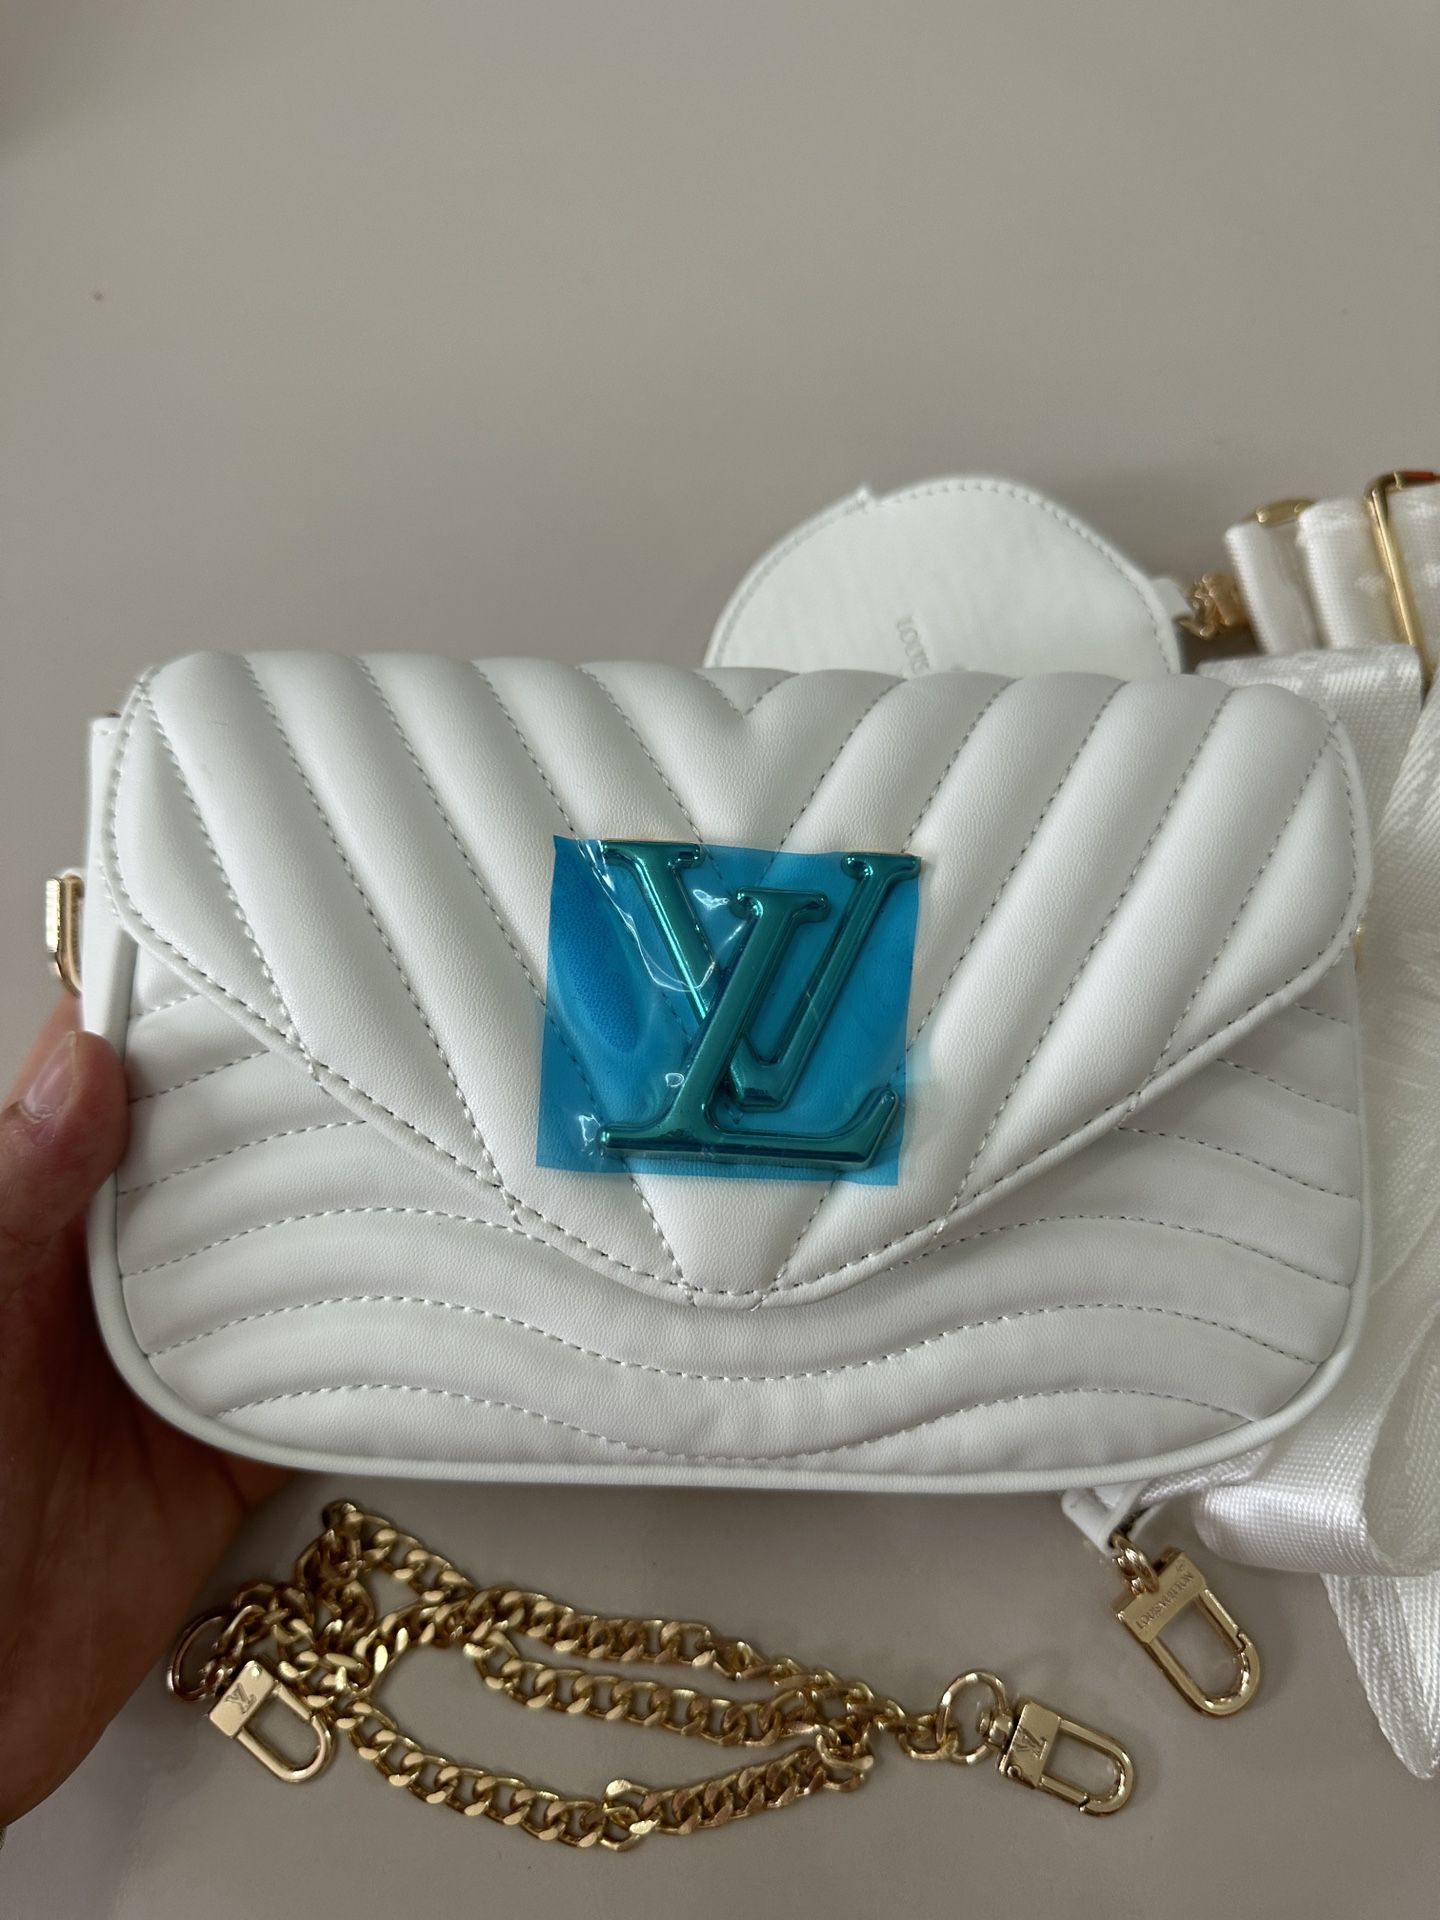 Lv Bag for Sale in Bay Shore, NY - OfferUp